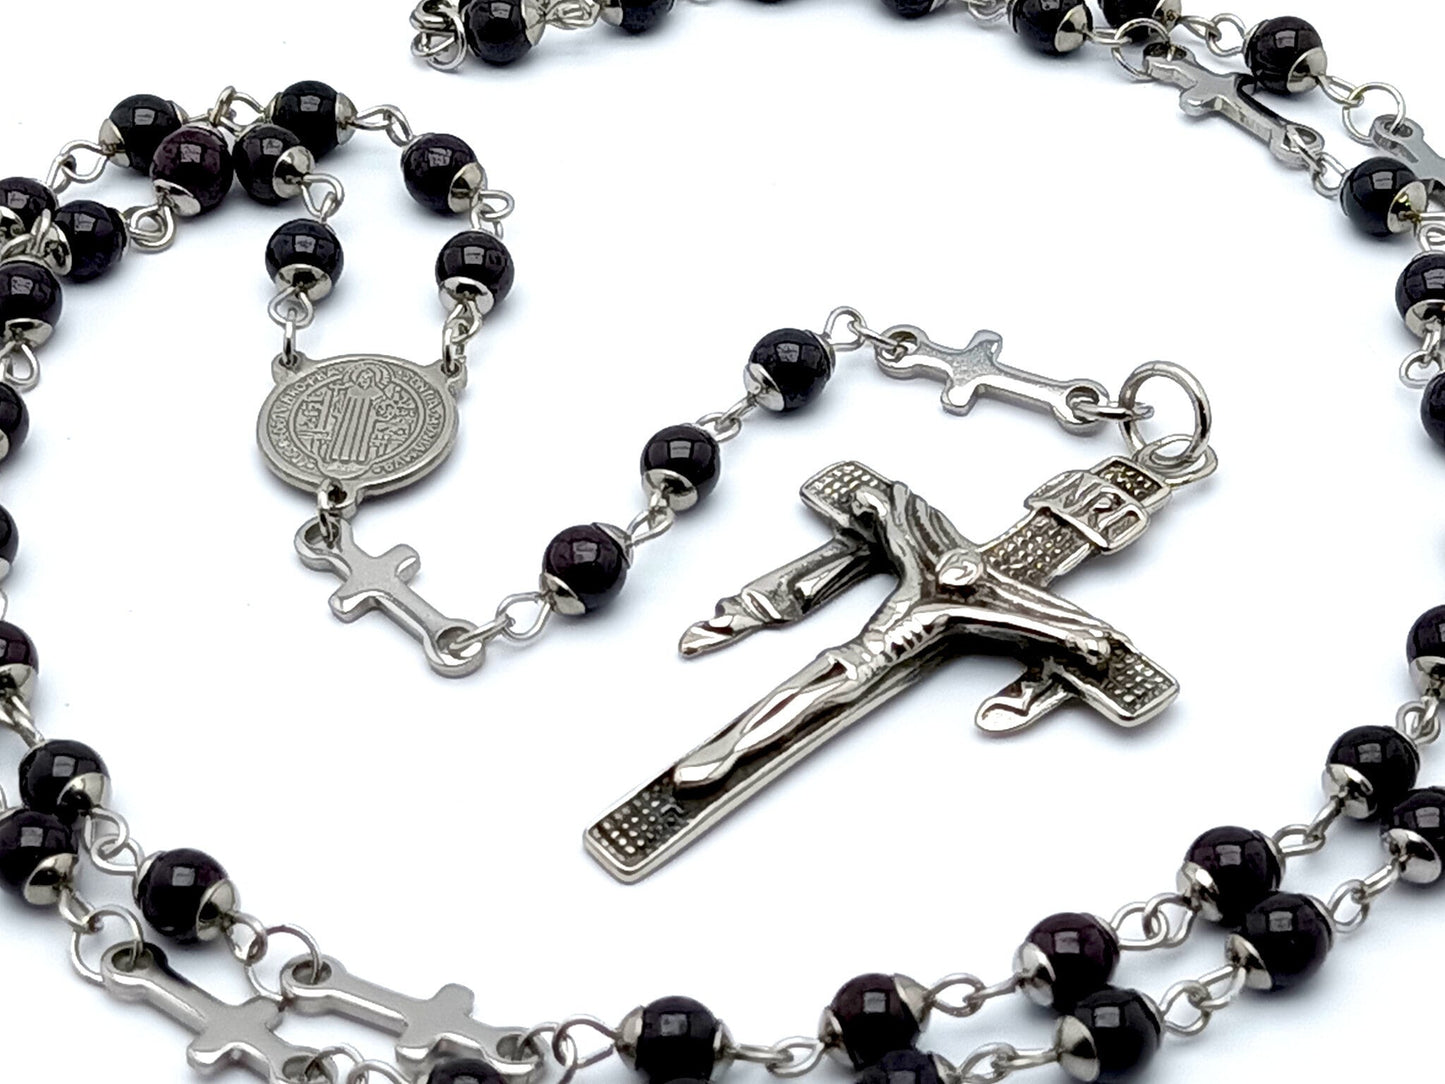 Saint Benedict unique rosary beads with onyx and stainless steel cross beads, stainless steel crucifix and Saint Benedict centre medal. 